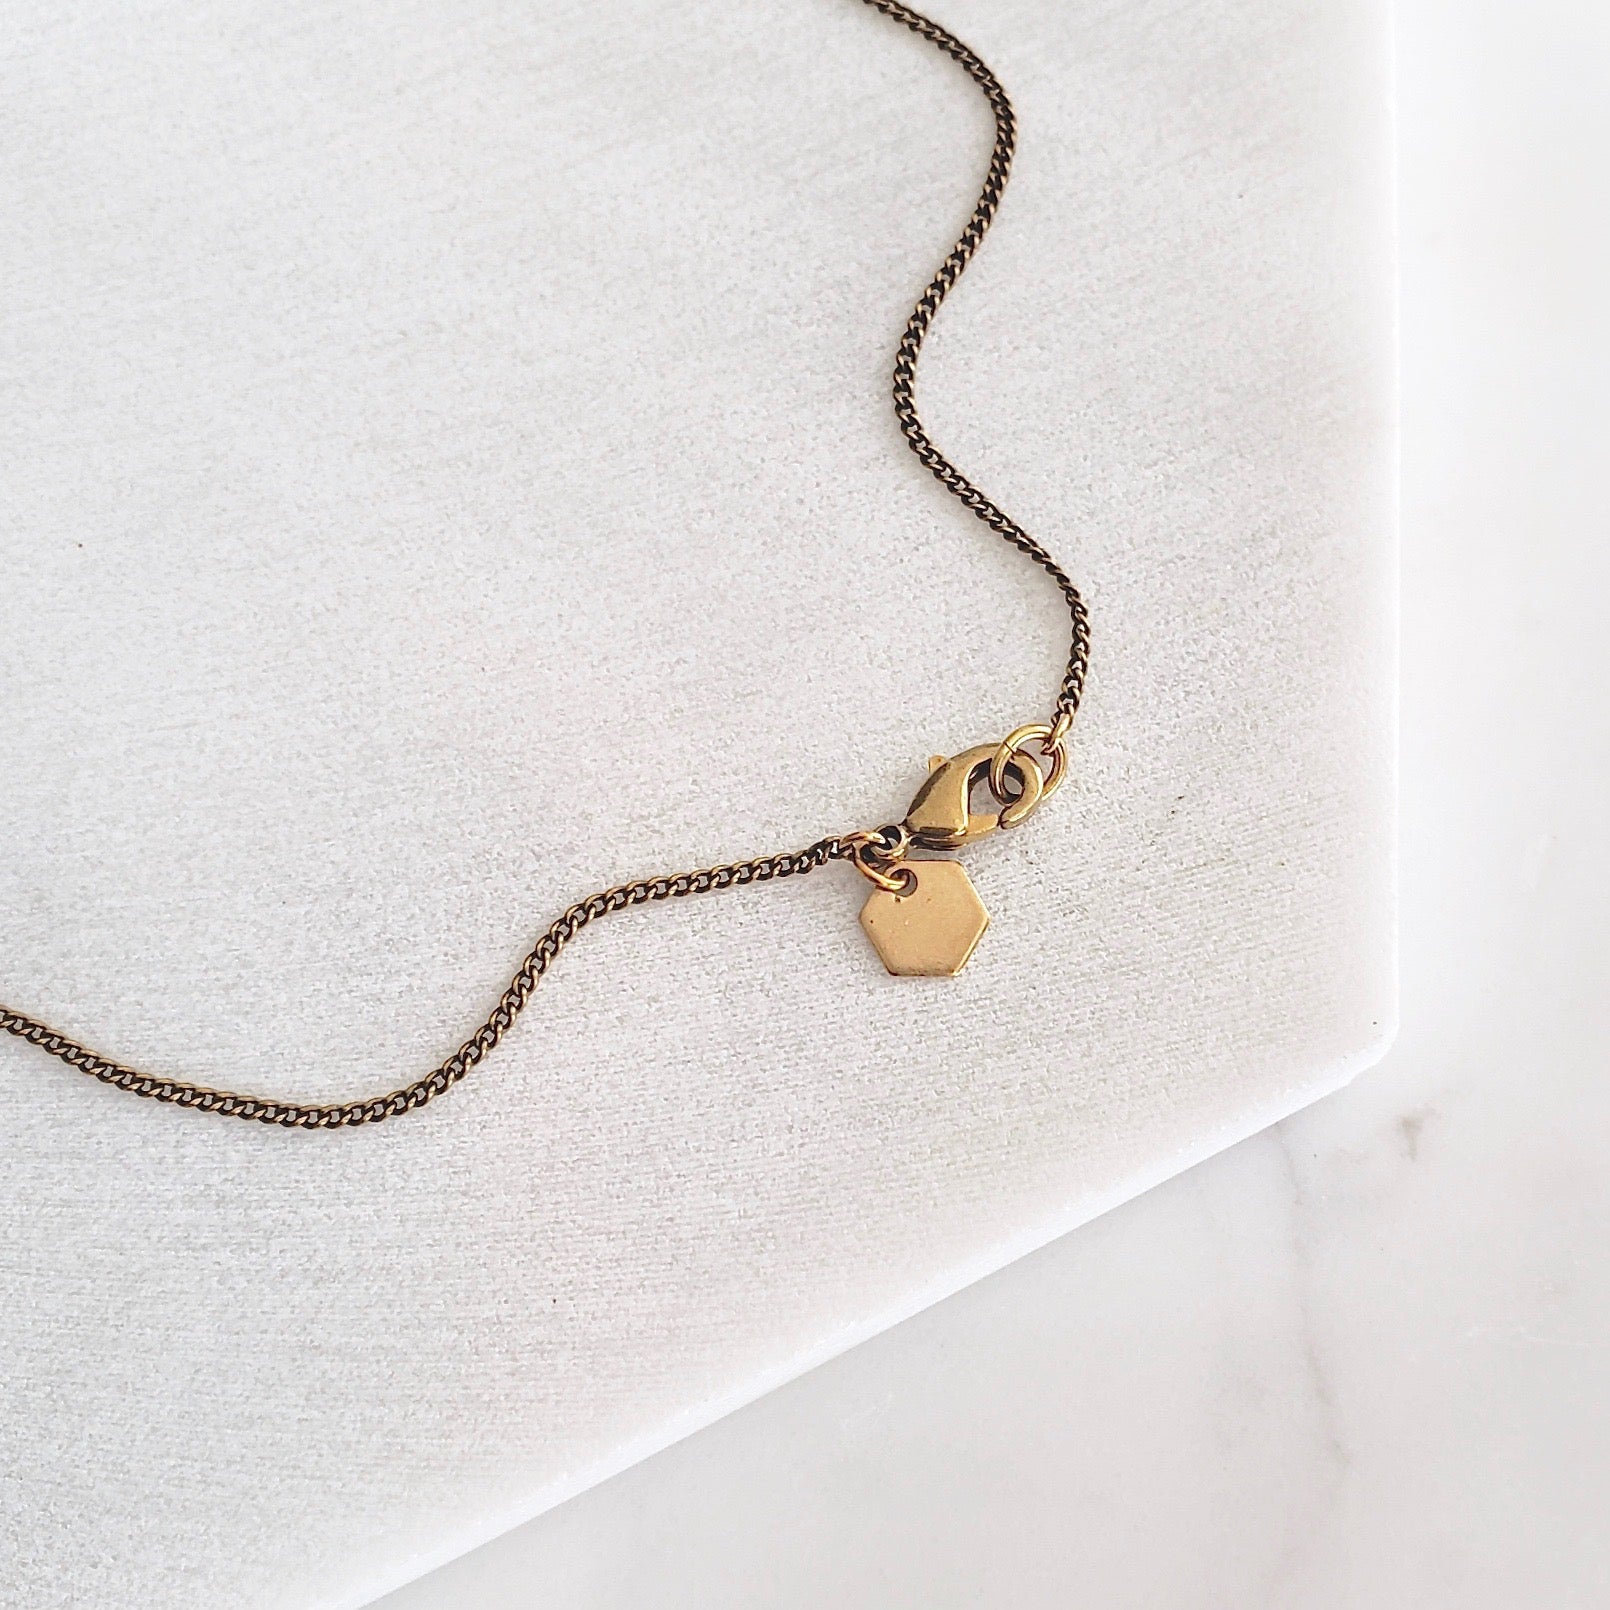 RAW HEX NECKLACE